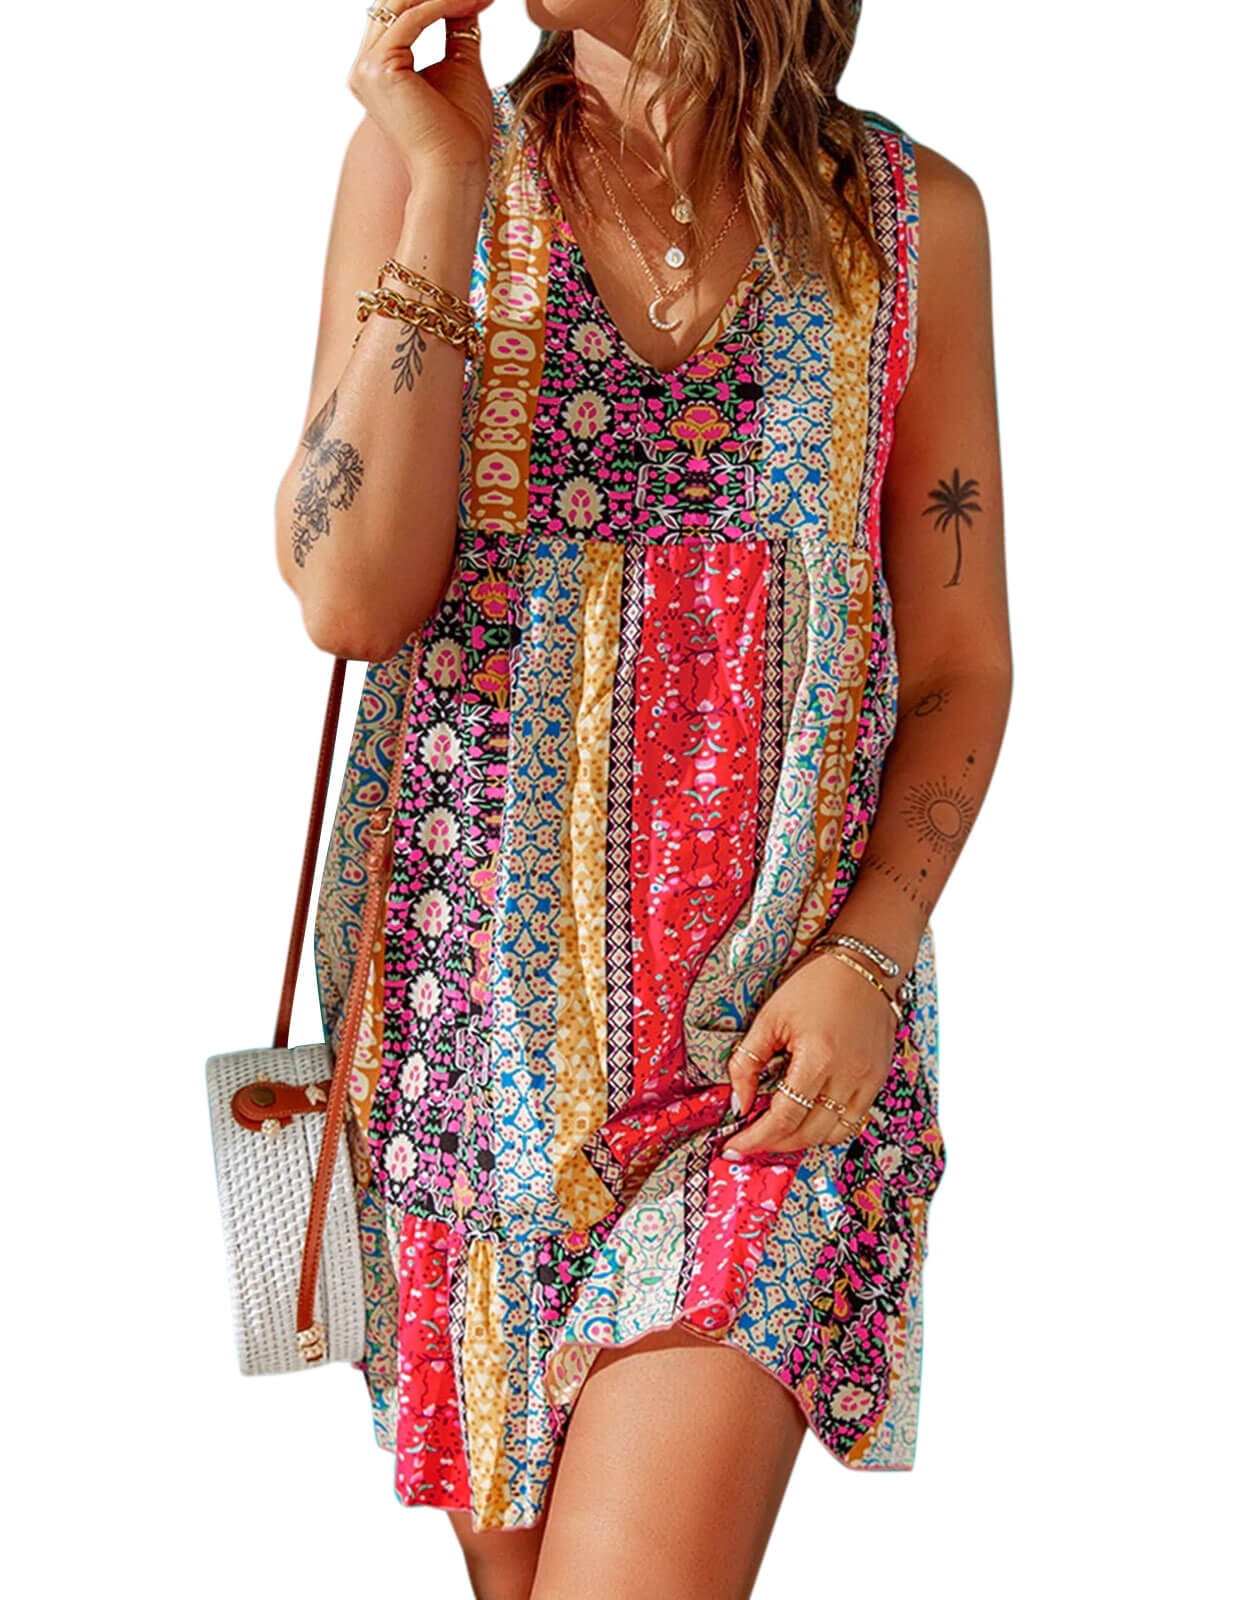 Womens Swimsuit Cover Up Sleeveless Bathing Suit Cover Up Casual Beach ...